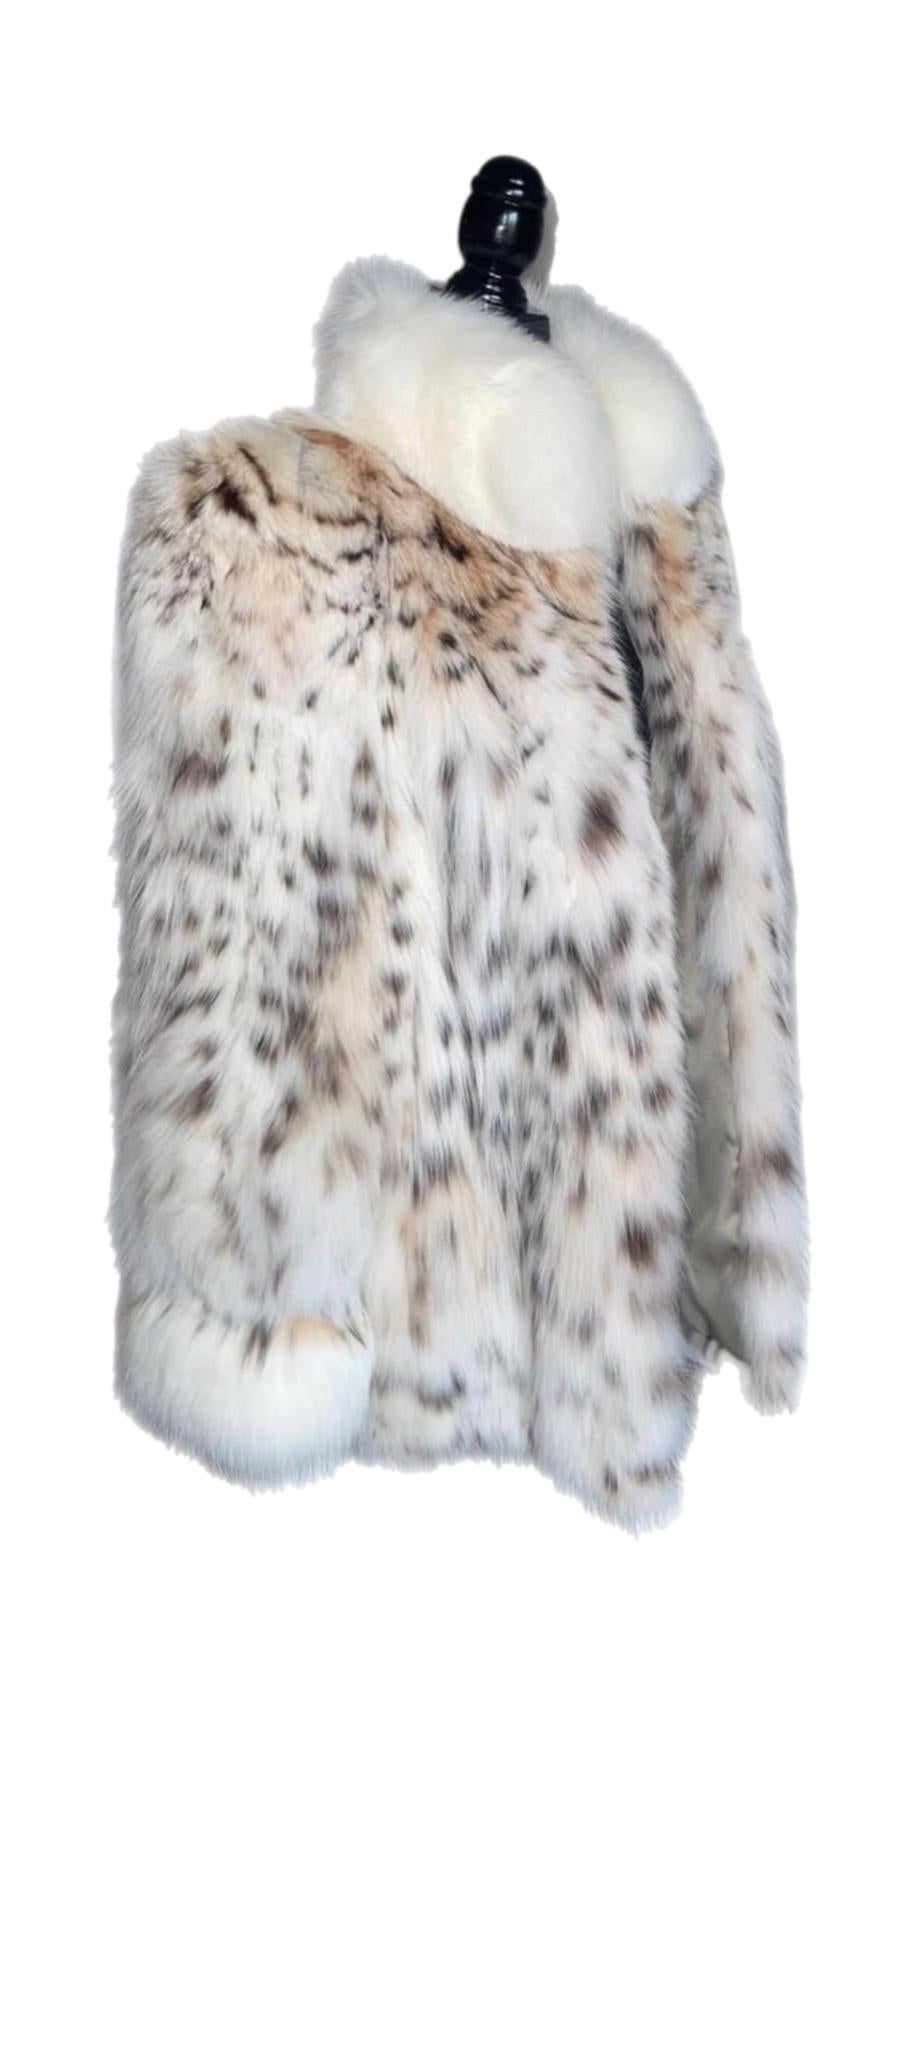 DESCRIPTION : Brand new Canadian lynx fur coat size 12-14


Tailored collar, straight sleeves, supple skins, beautiful fresh fur, european german clasps for closure, too slit pockets, nice big full pelts skins in new equisite condition.

Condition: